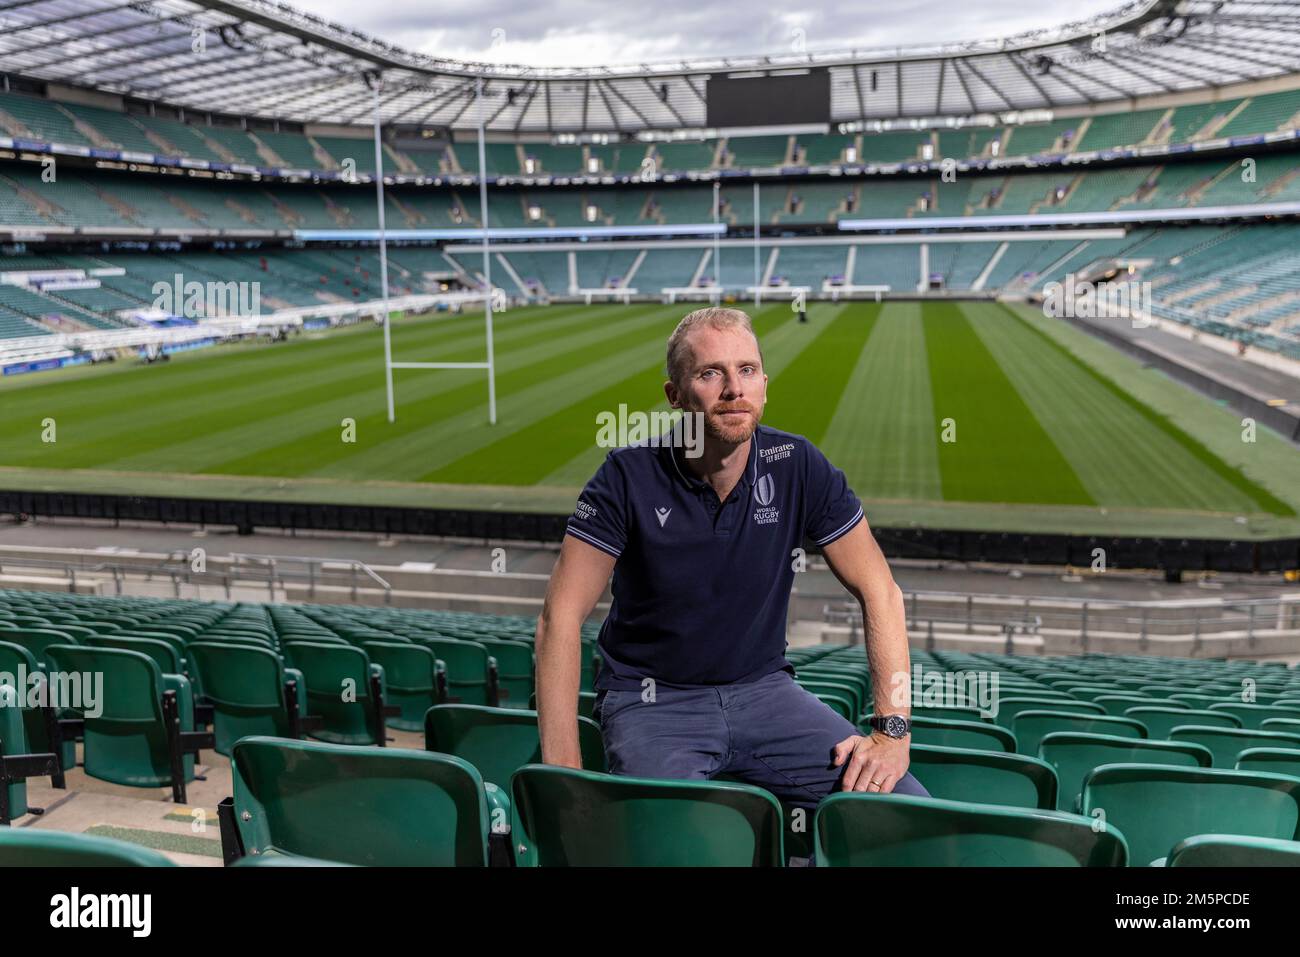 Wayne Barnes, photographed at Twickenham, English international rugby union referee and barrister. He is a regular referee in the English Premiership. Stock Photo